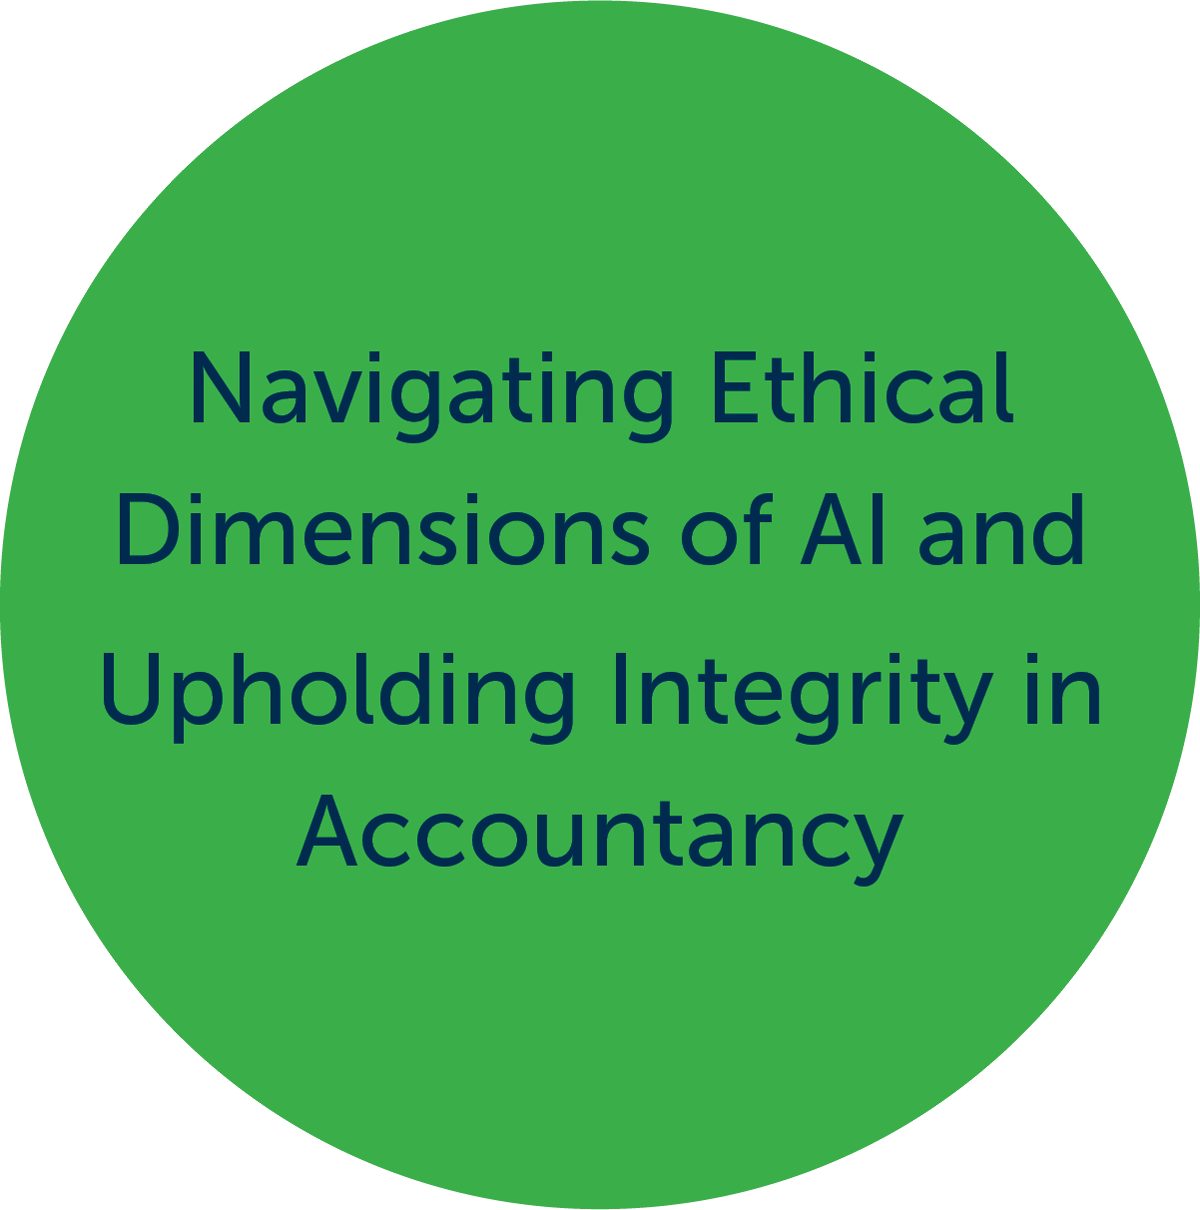 Navigating Ethical Dimensions of AI and Upholding Integrity in Accountancy